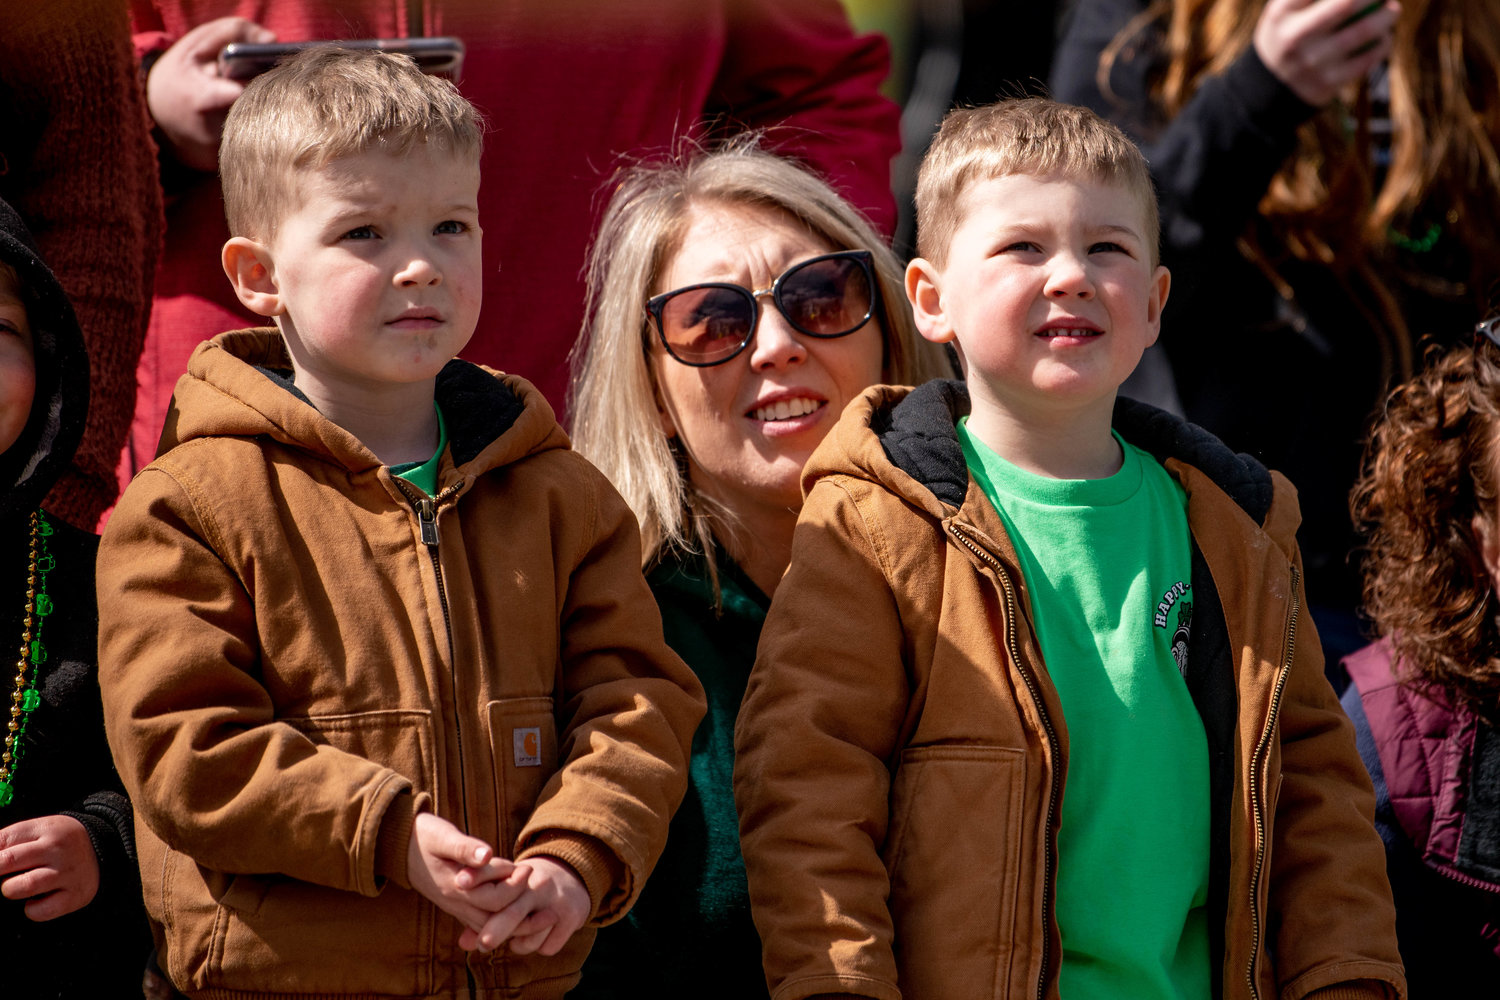 Regina Murphy and her twin sons, Ryan and Aidan, watch the horses go by.